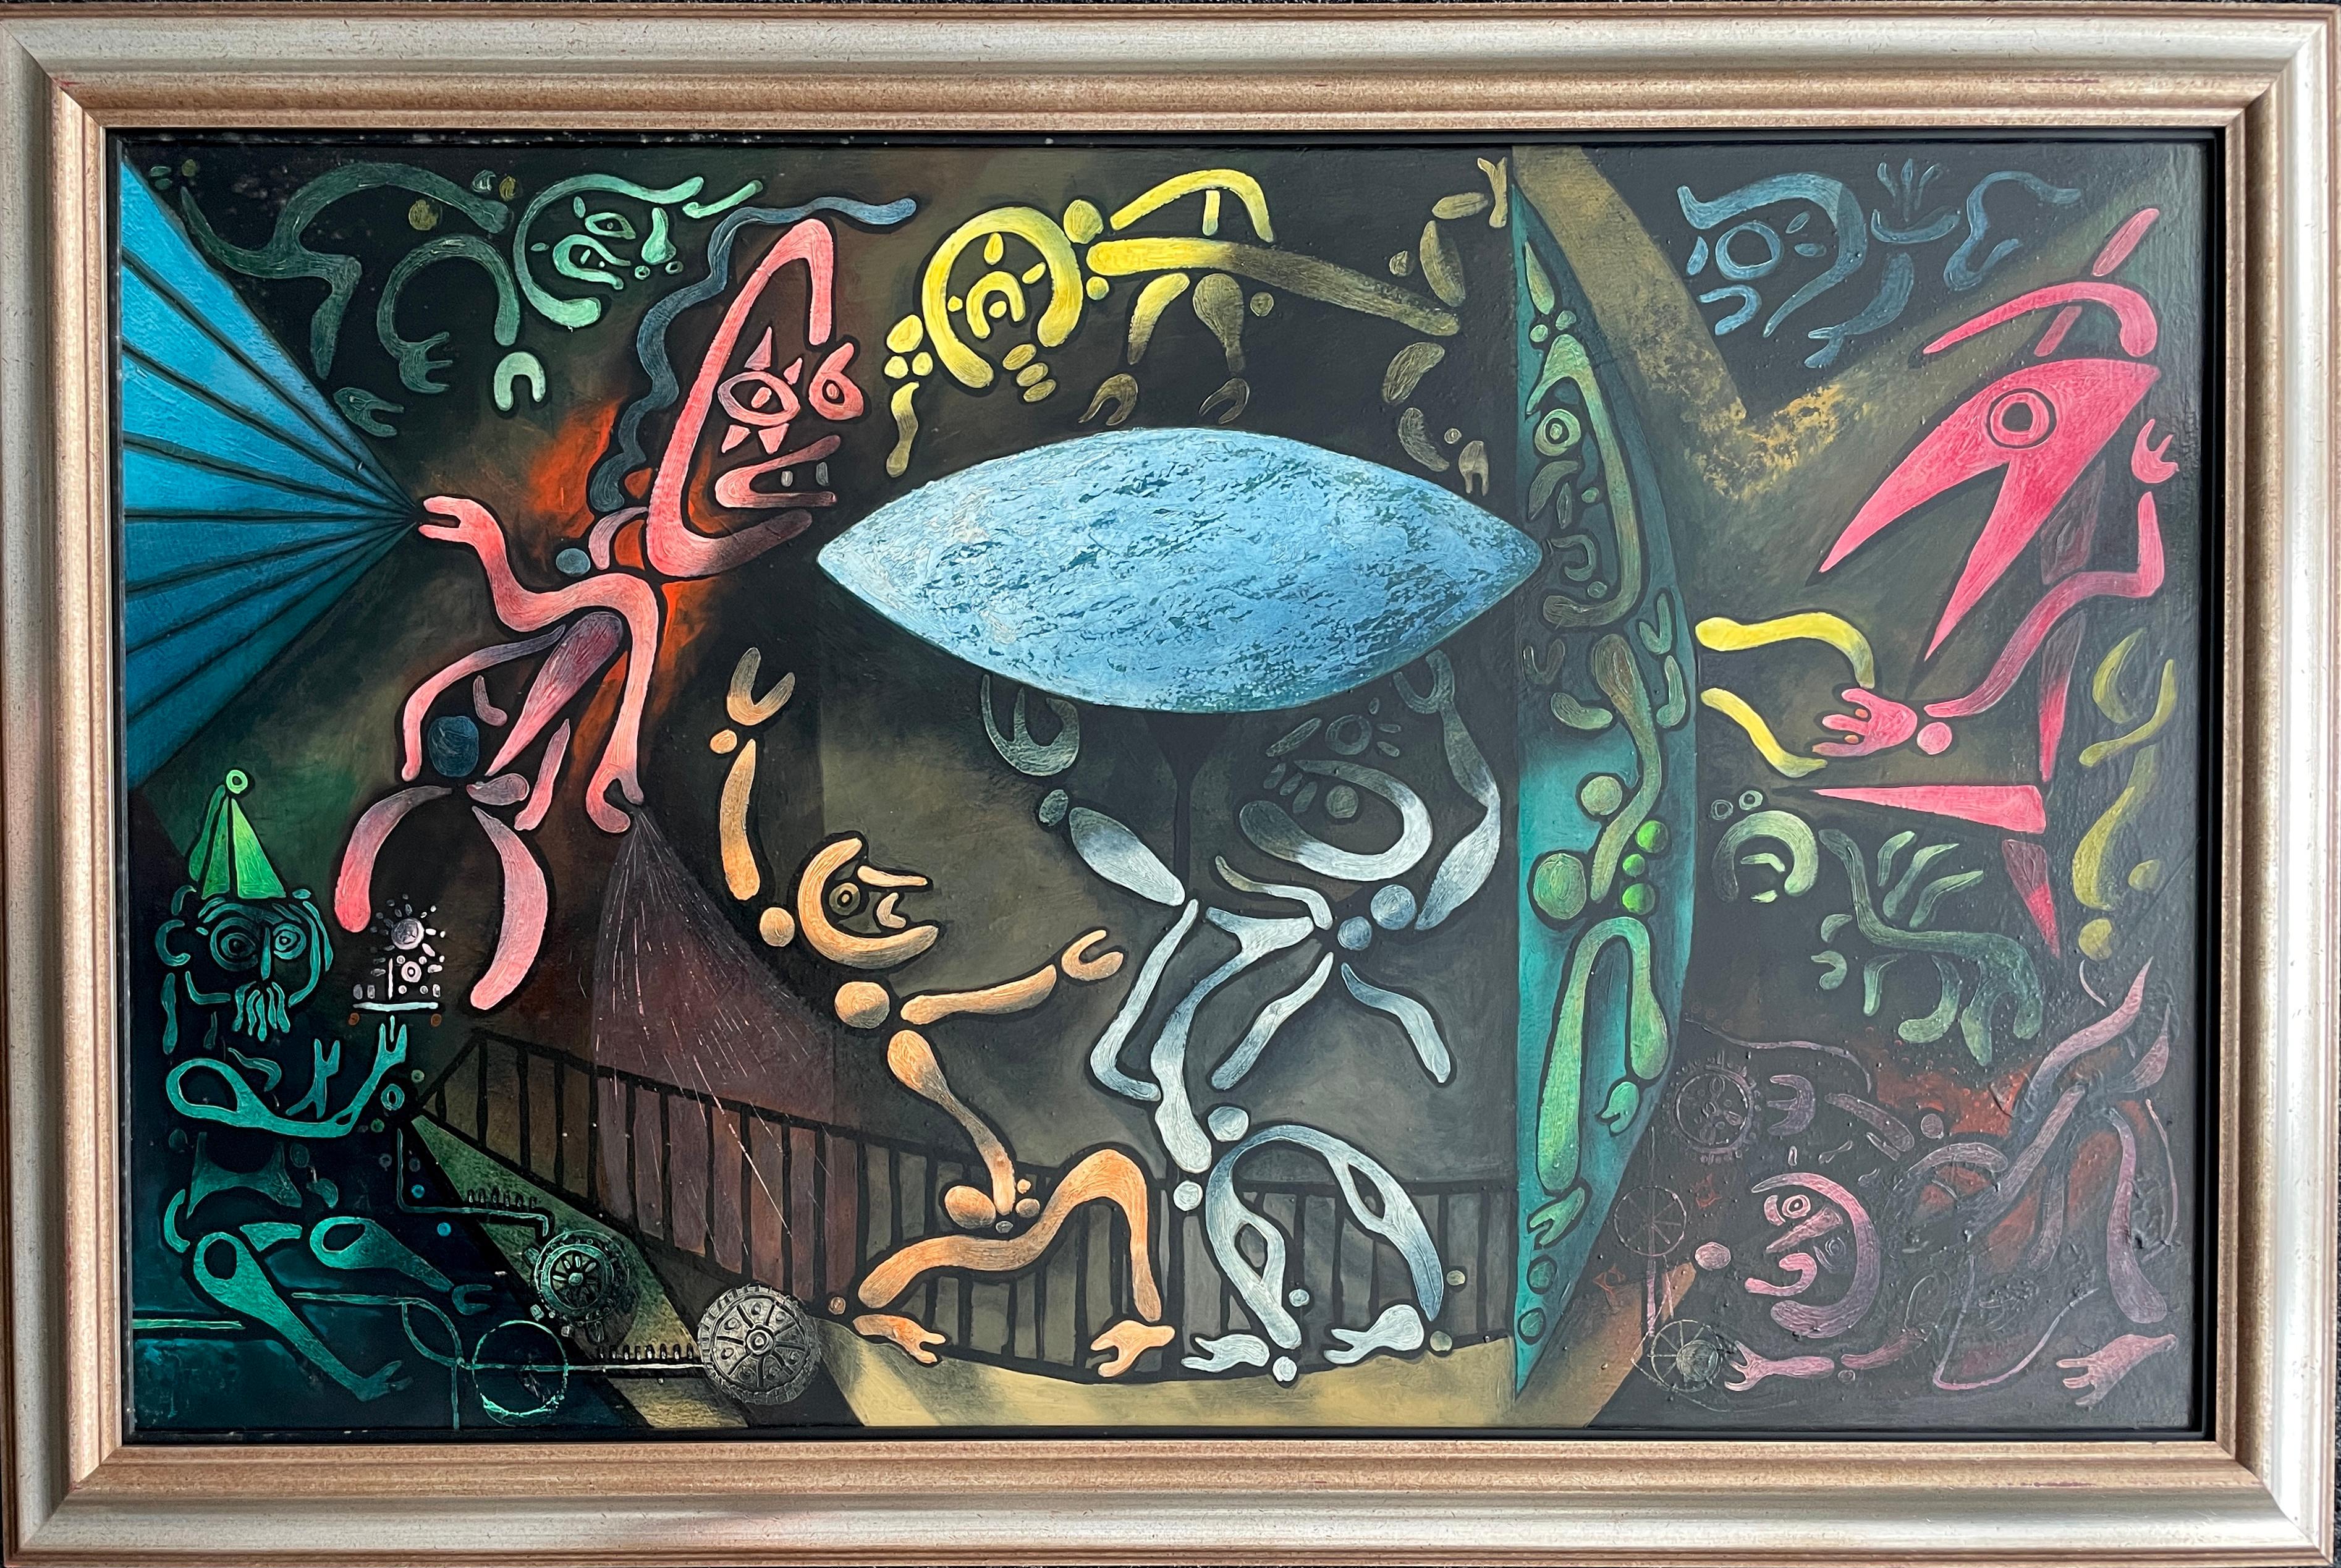 Inevitable Day – Birth of the Atom oil and tempera painting by Julio De Diego